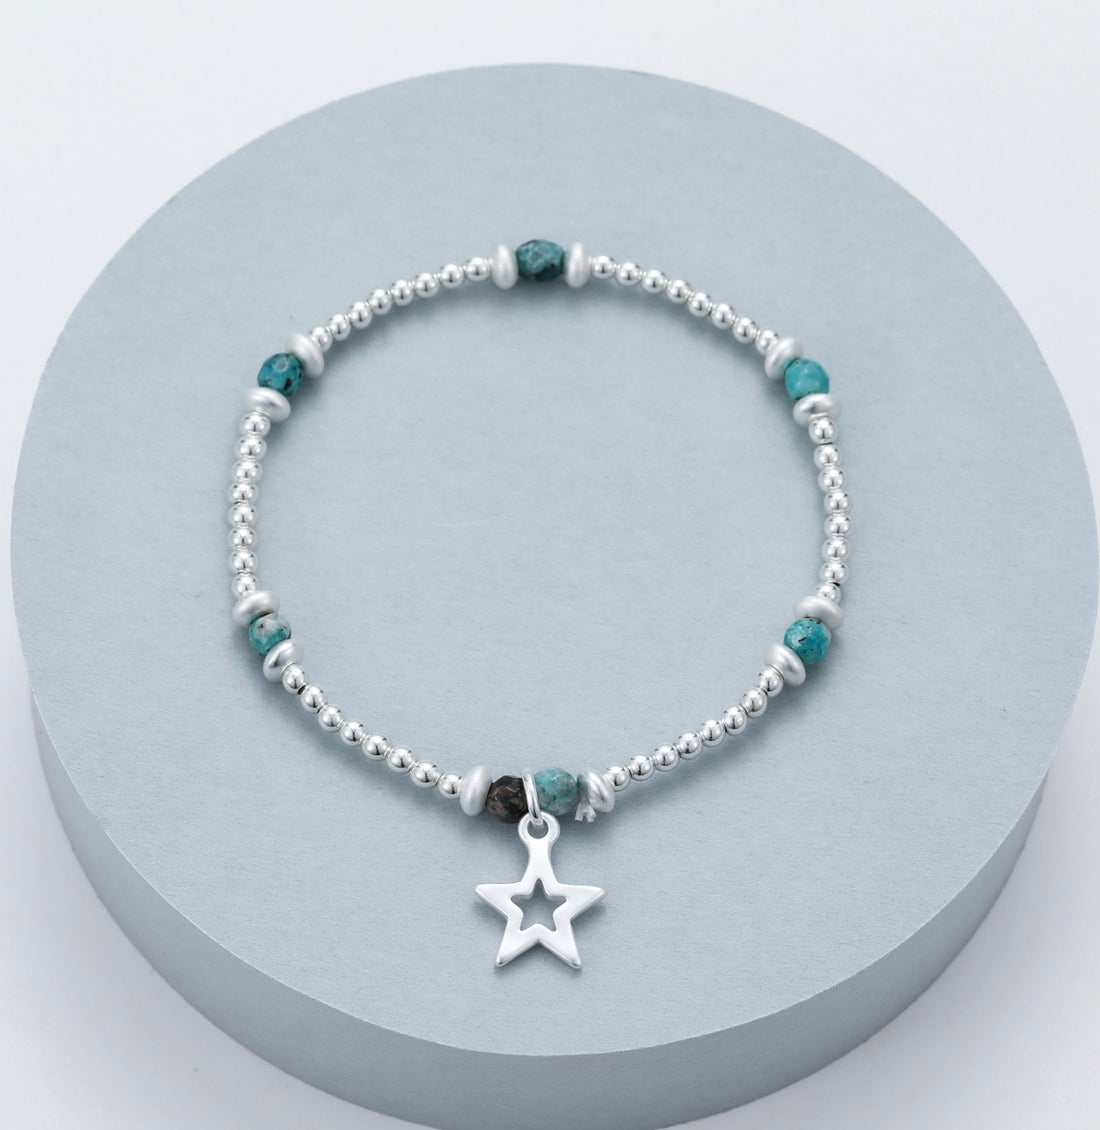 Beaded Bracelet In Silver And Green with Star Charm